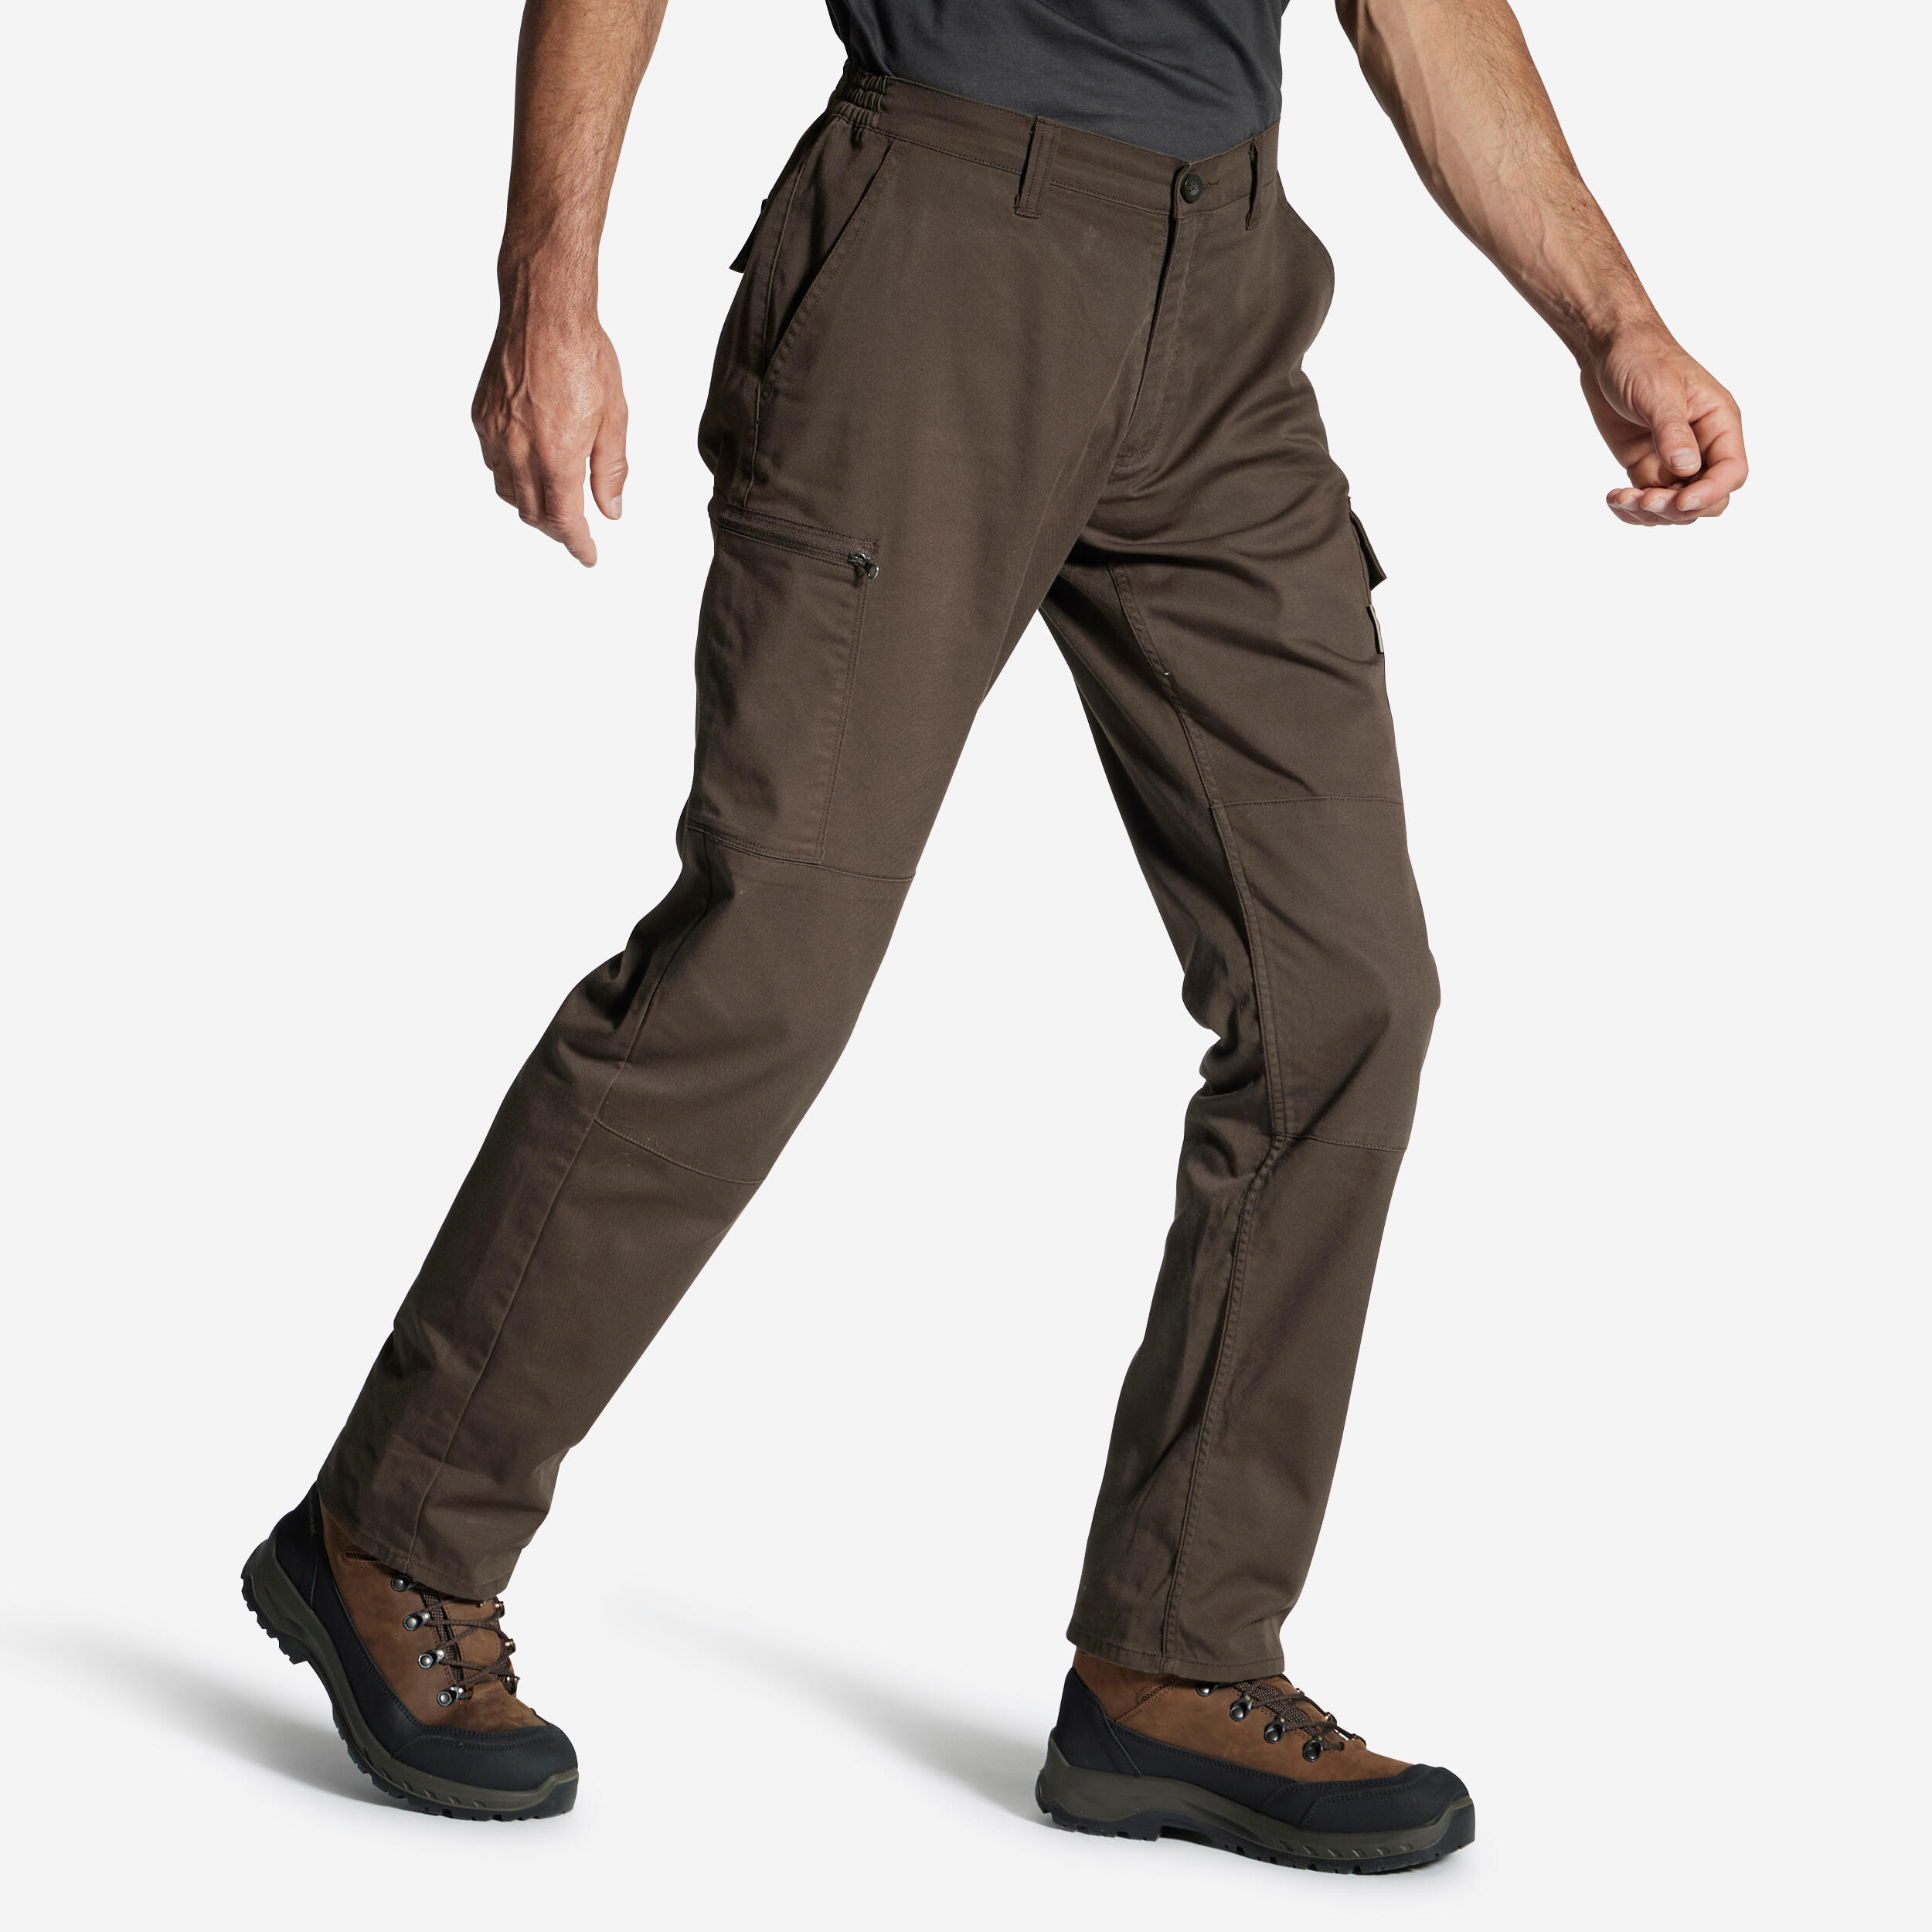 Buy Pants for Outdoor Sports at decathlonin  5 Year Warranty